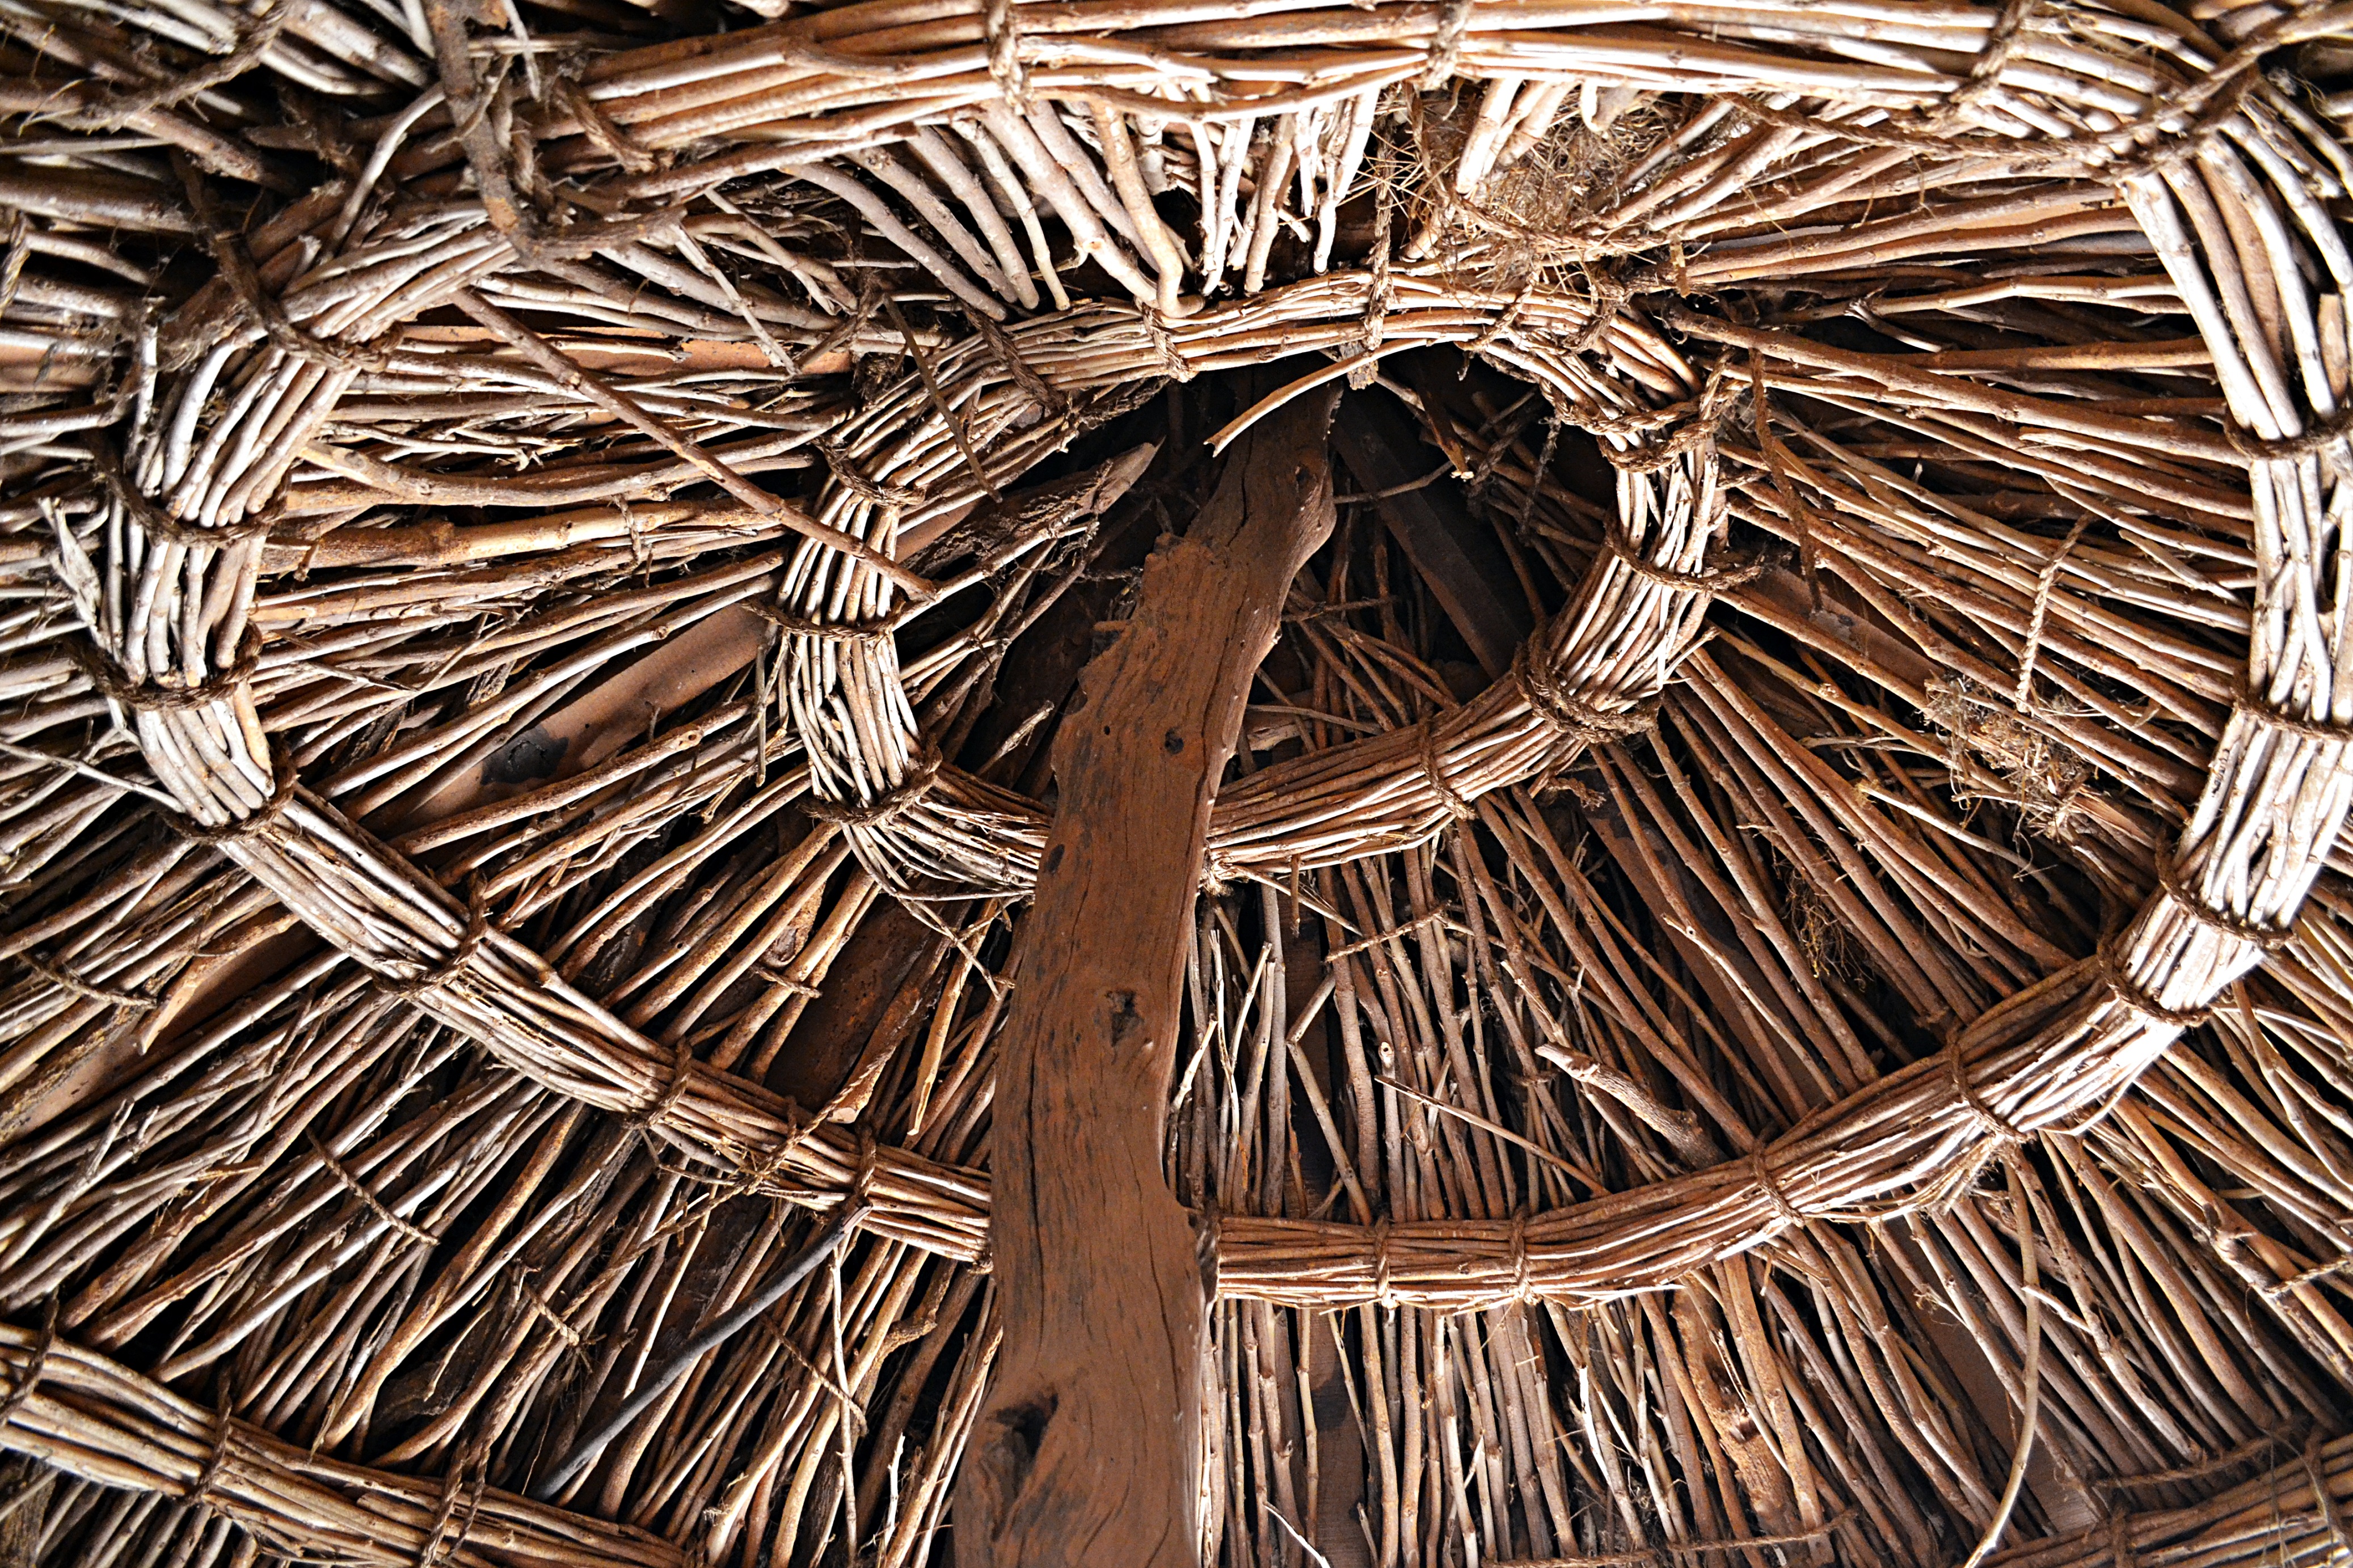 A thatched roof made from the stems of kheemp grass, a type of hemp found abundantly in the Thar. Photo by Stuti Bhadauria